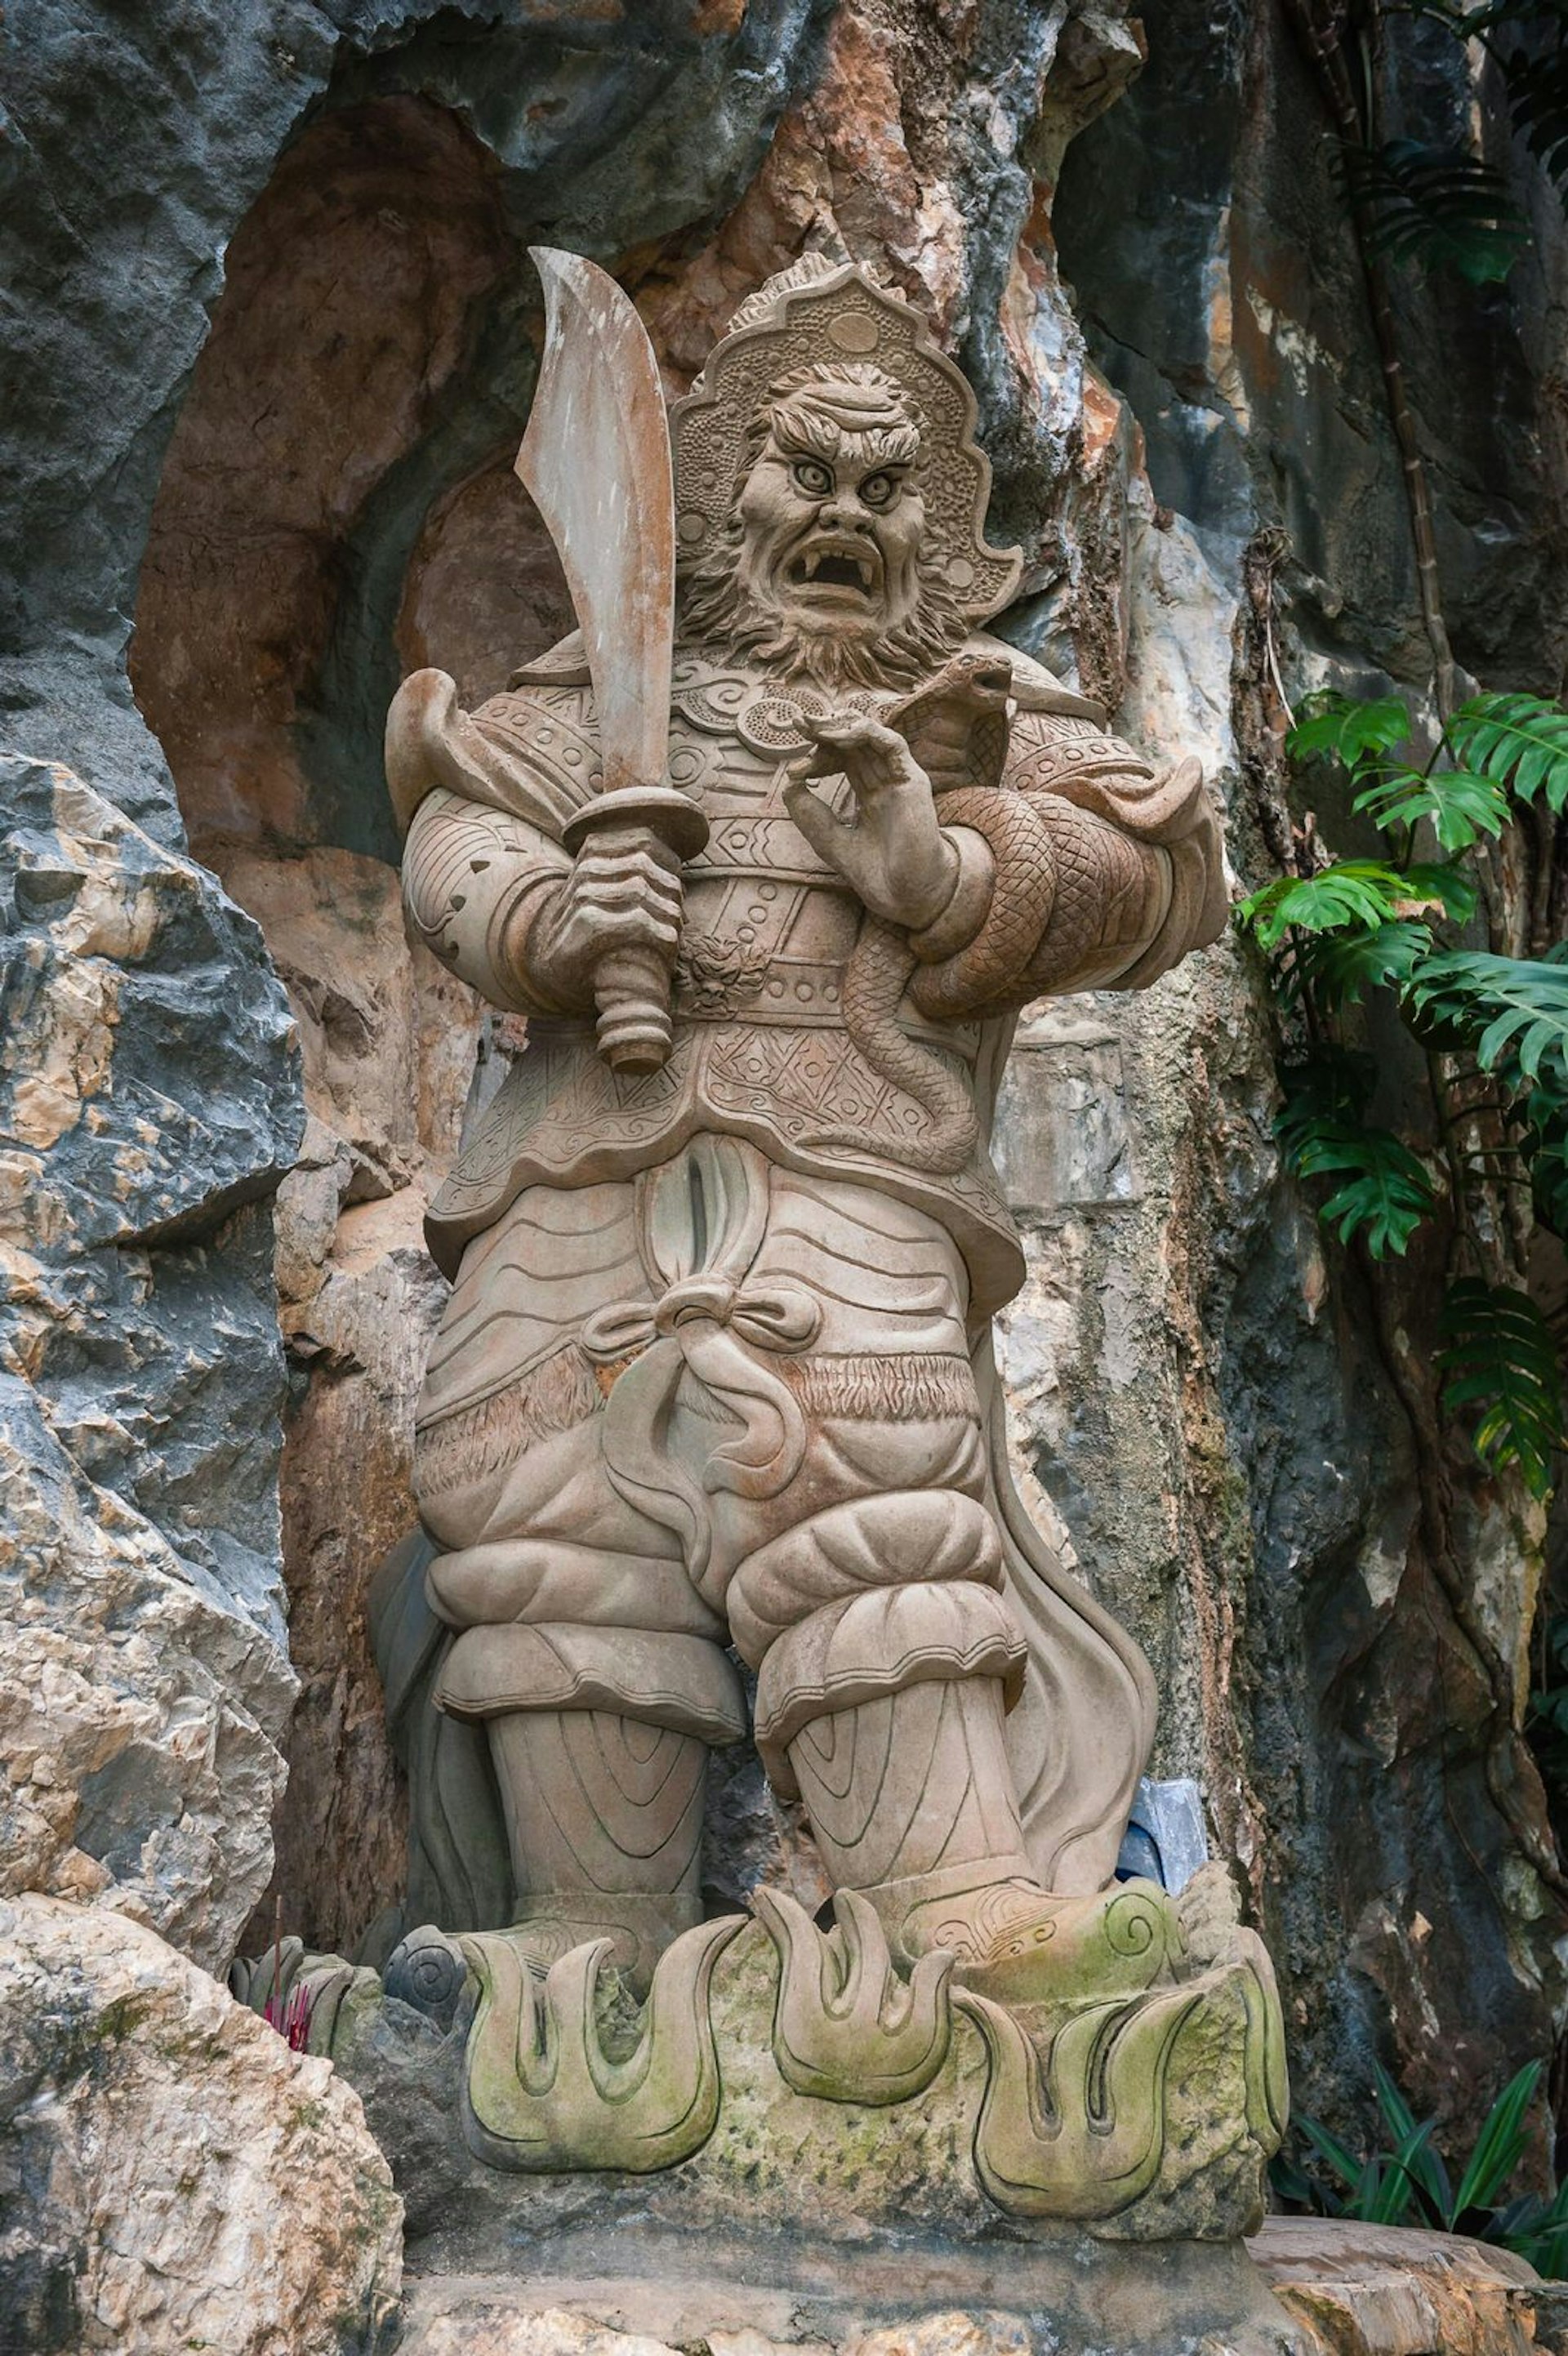 A sculpture of an evil man in Am Phu Cave, the Marble Mountains 